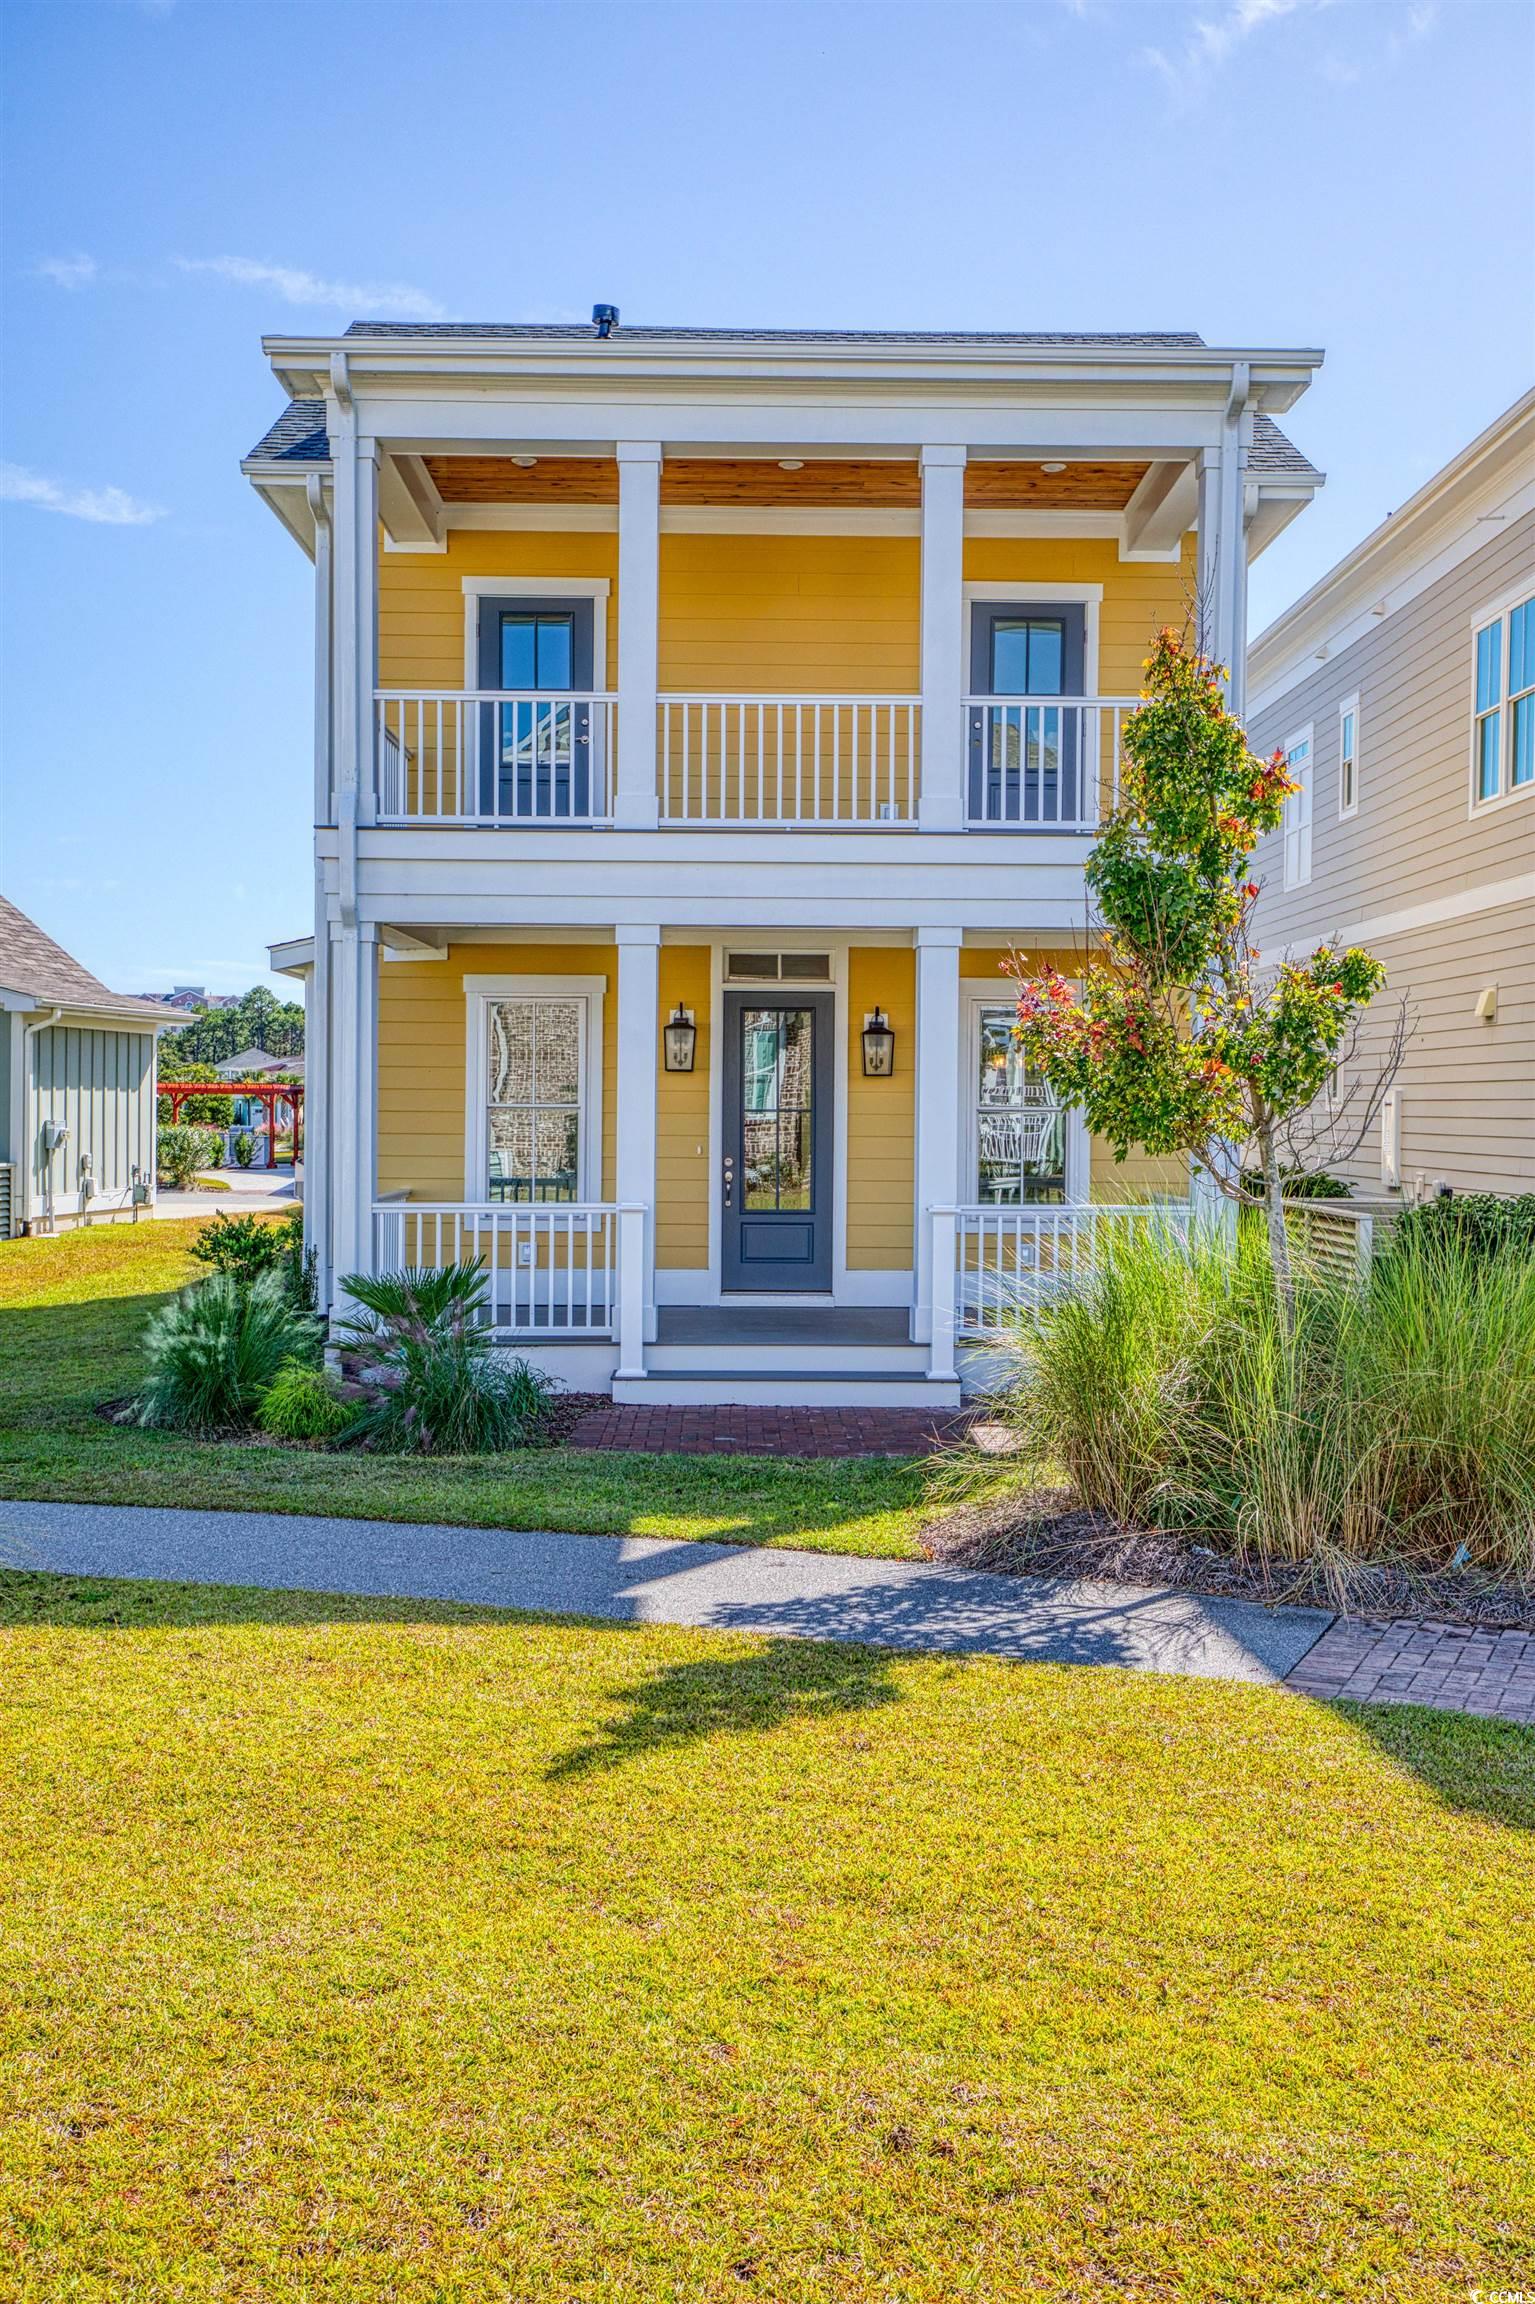 at 1,815 heated sq ft, this 2-story charleston home, located on lot 26, features a 2nd story porch with a water view and is ready for a quick close!  this open floor plan offers 3 bedrooms, with a first level master suite and 2 additional generously sized bedrooms upstairs that offer french doors that lead to the 2nd story porch.    additional structural upgrades included in this particular charleston are the natural gas fireplace and an office ilo a storage room located on the ground floor tucked under the stairs.  interior features include upgraded lighting, gorgeous quartzite kitchen countertops with a waterfall edge, a gas range, and lvp flooring in all the common areas and the primary bedroom.   come live the grande dunes lifestyle at living dunes in our new construction homes with lakefront, water view or private perimeter real estate available. located on the north end of myrtle beach less than 1 mile from the ocean, living dunes features low-country style single and multi-family homes constructed by locally renowned, crg companies. our homes are built with elevated materials and practices that surpass regulations allowing you to own a quality home that is energy efficient and eco-friendly. our kitchens feature designer quality elmwood cabinets, with soft close doors and drawers, cove crown molding, and a light rail with under cabinet led lighting.  in our list of standard specifications are granite countertops, tile backsplash, stainless steel appliances, 2 x 6 construction, impact resistant windows, natural gas, rinnai tankless water heaters, icynene spray foam insulation and cutting-edge home technology. as myrtle beach’s first gigabit community, living dunes provides residents with internet connections 100 times faster than the average, meaning more time spent doing what you want. residents have superior on-site amenities with a zero entry free form swimming pool. that offers a tanning shelf, well appointed clubhouse, miles of walking trails, 10 acres of lakes, and green spaces. thoughtful design and unprecedented amenities, the community’s location offers convenient access to the beach, grande dunes ocean club, marina, golf courses, and several major marketplaces with groceries, pharmacies, shopping, dining, fitness, health care, salons, and more. live local, live smart, living dunes.  photos shown are of another similar plan in living dunes.